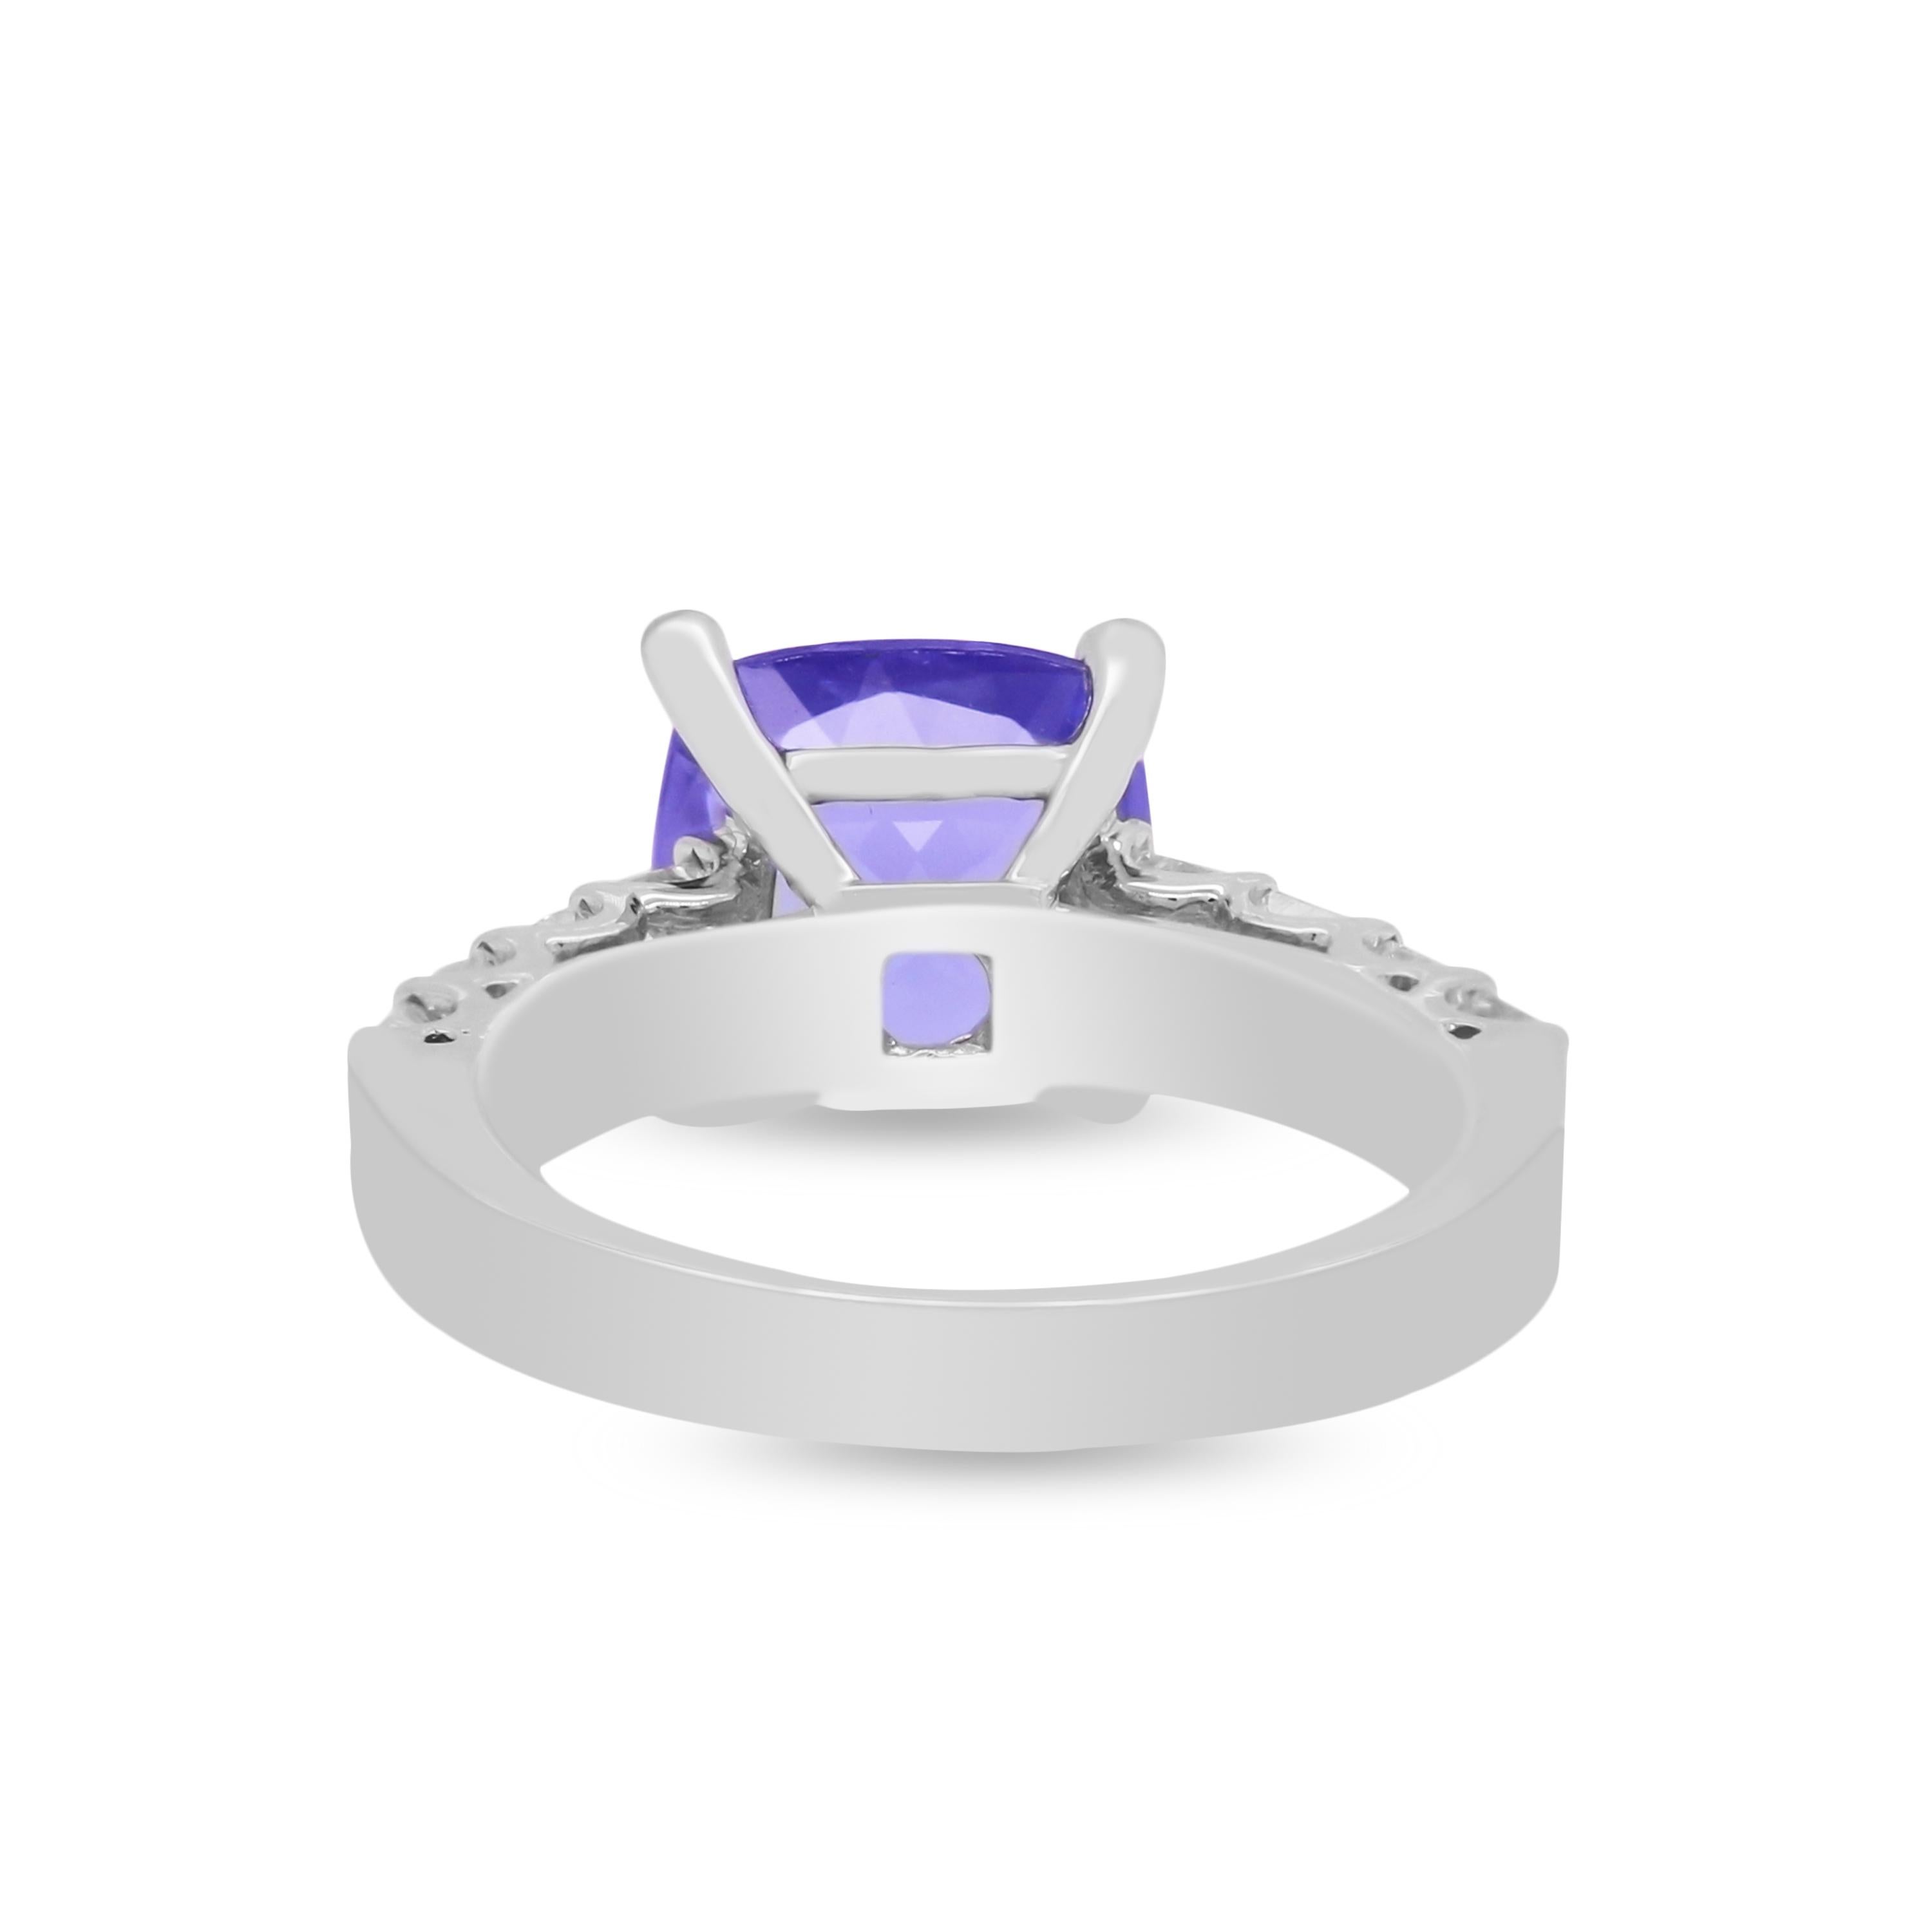 Contemporary White Gold and Princess Cut Diamonds Ring with Cushion Cut Tanzanite Center For Sale